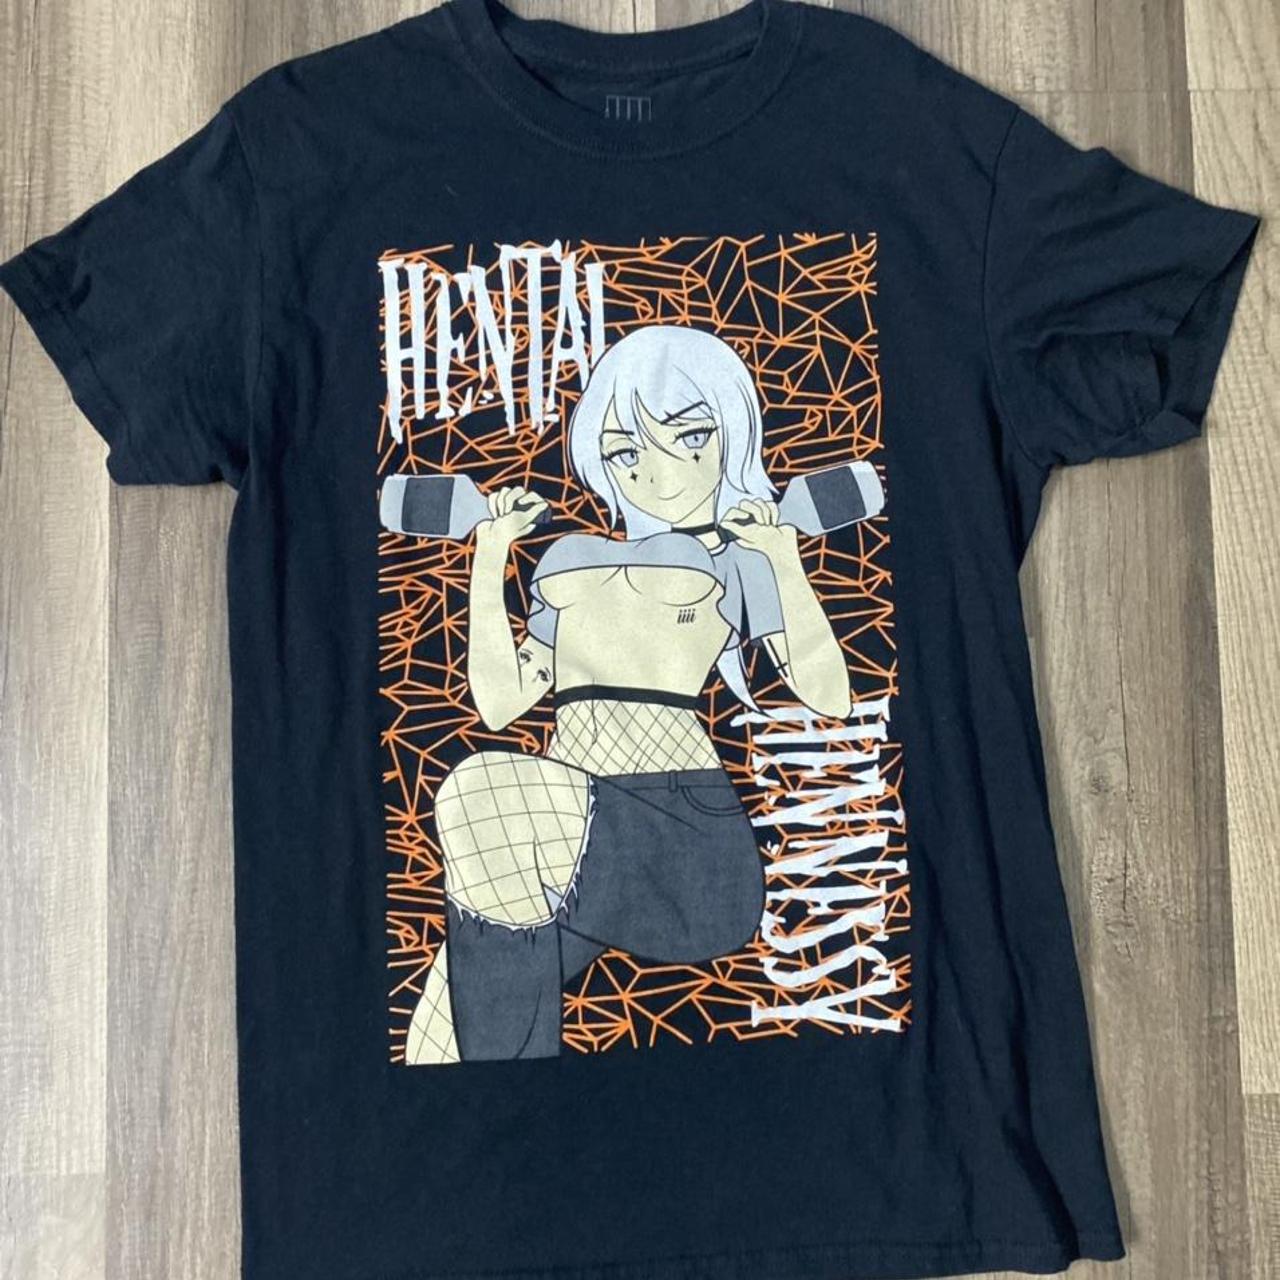 spencers Spencer's Anime Shirt Black Size M - $10 (60% Off Retail) - From  bryanna